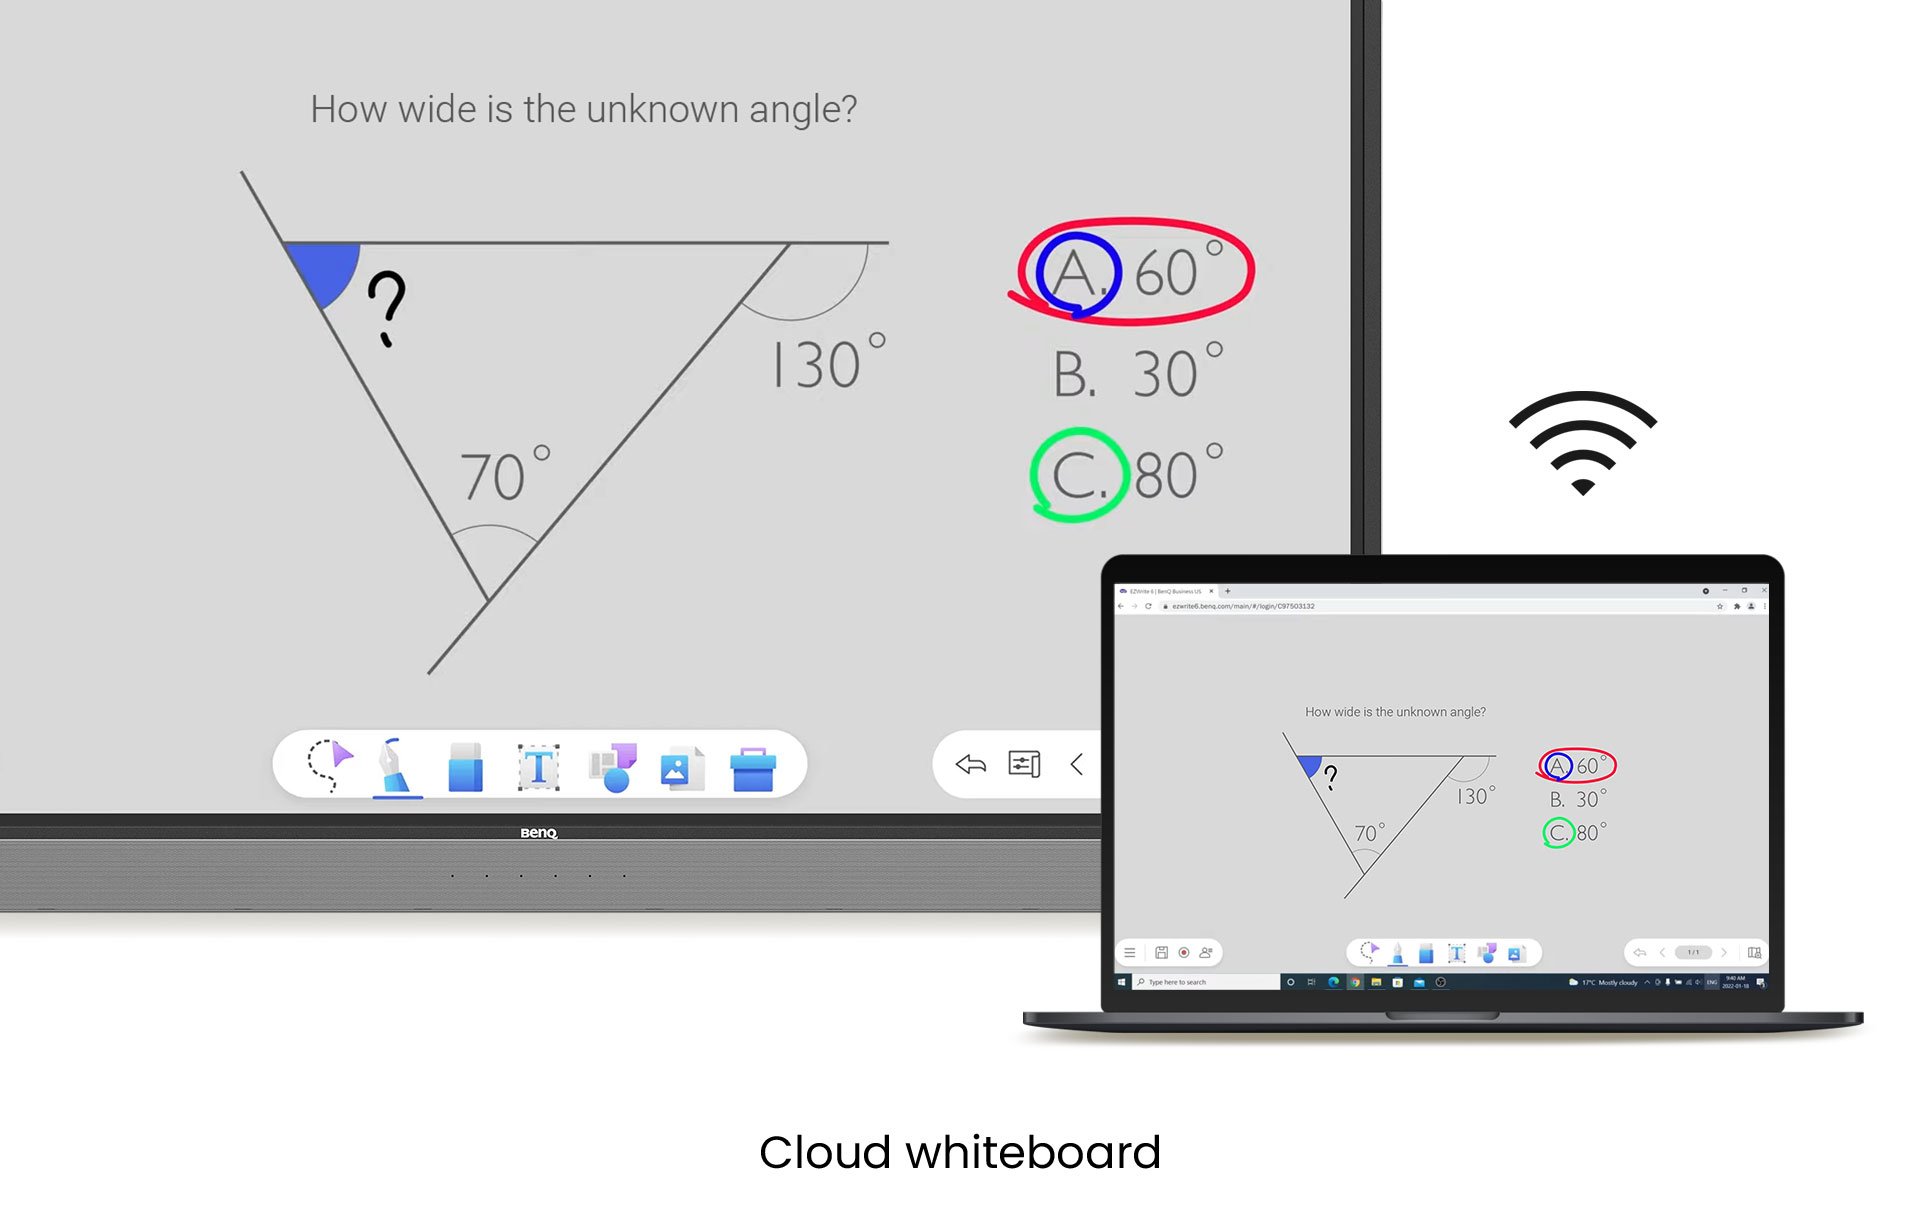 BenQ interactive whiteboard software - EZWrite 6 Cloud whiteboard for remote collaboration